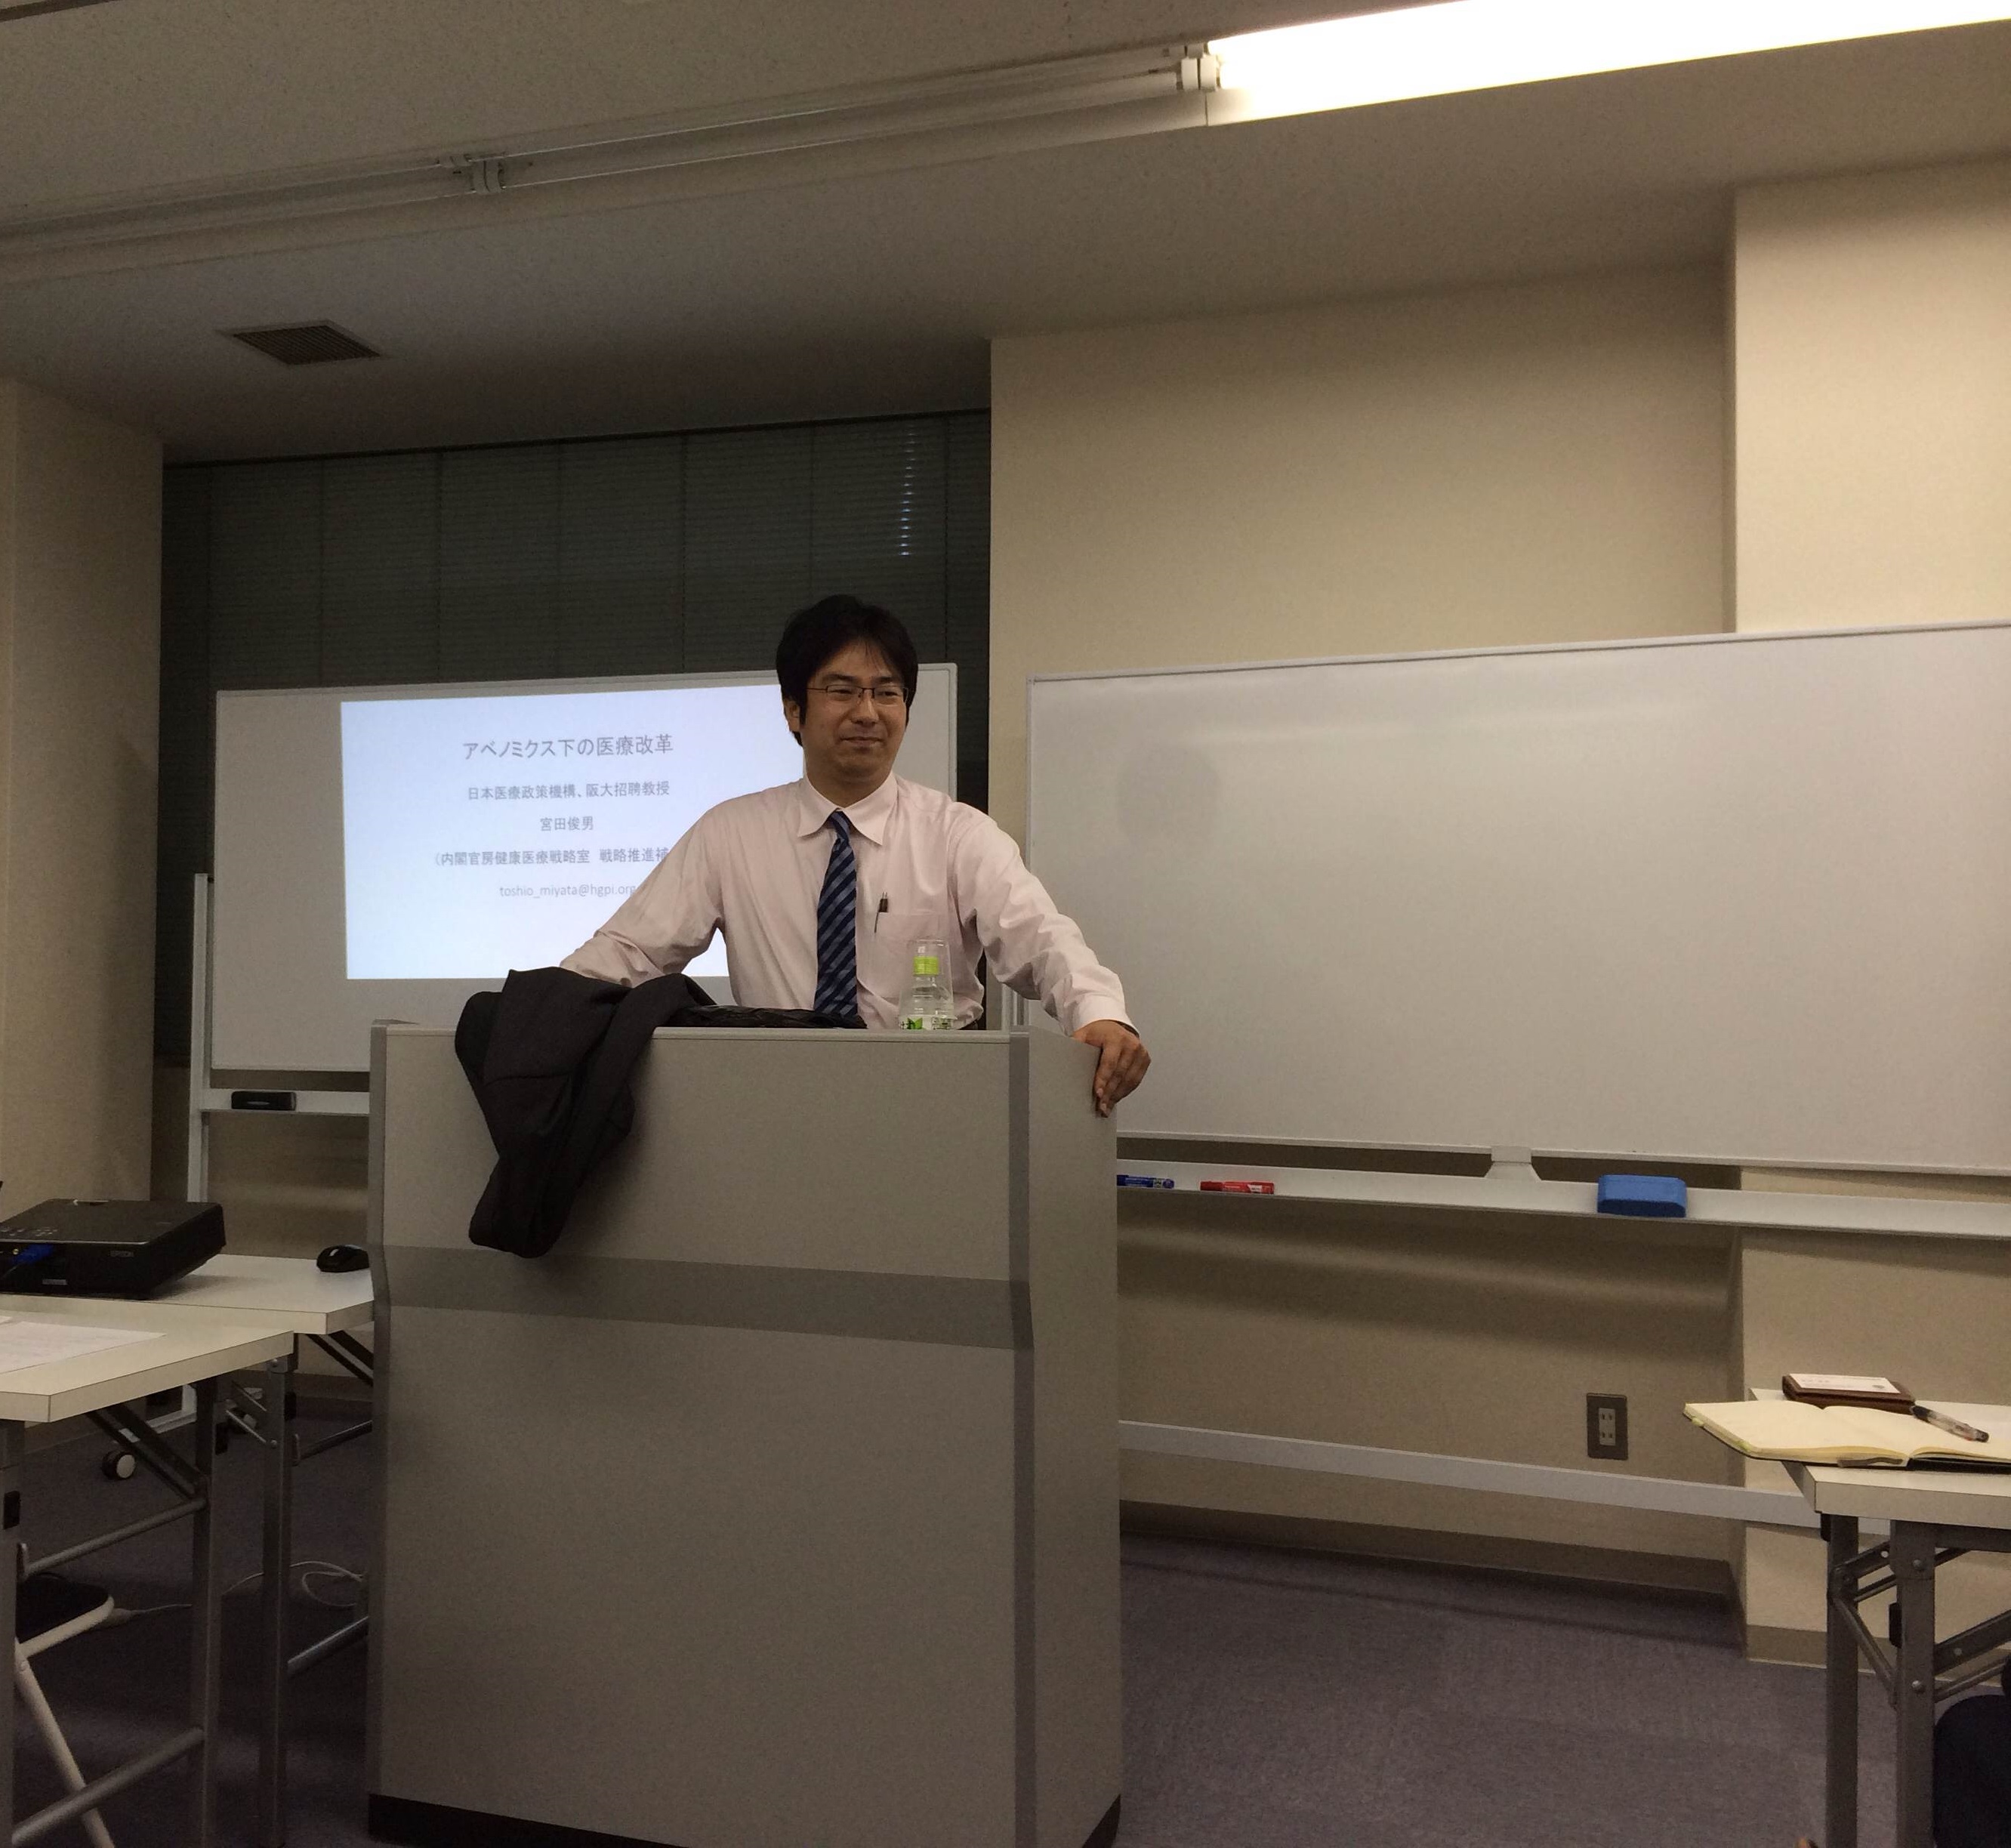 (Event Report) Lecture Series featuring Dr. Toshio Miyata at Aoyama Shachu